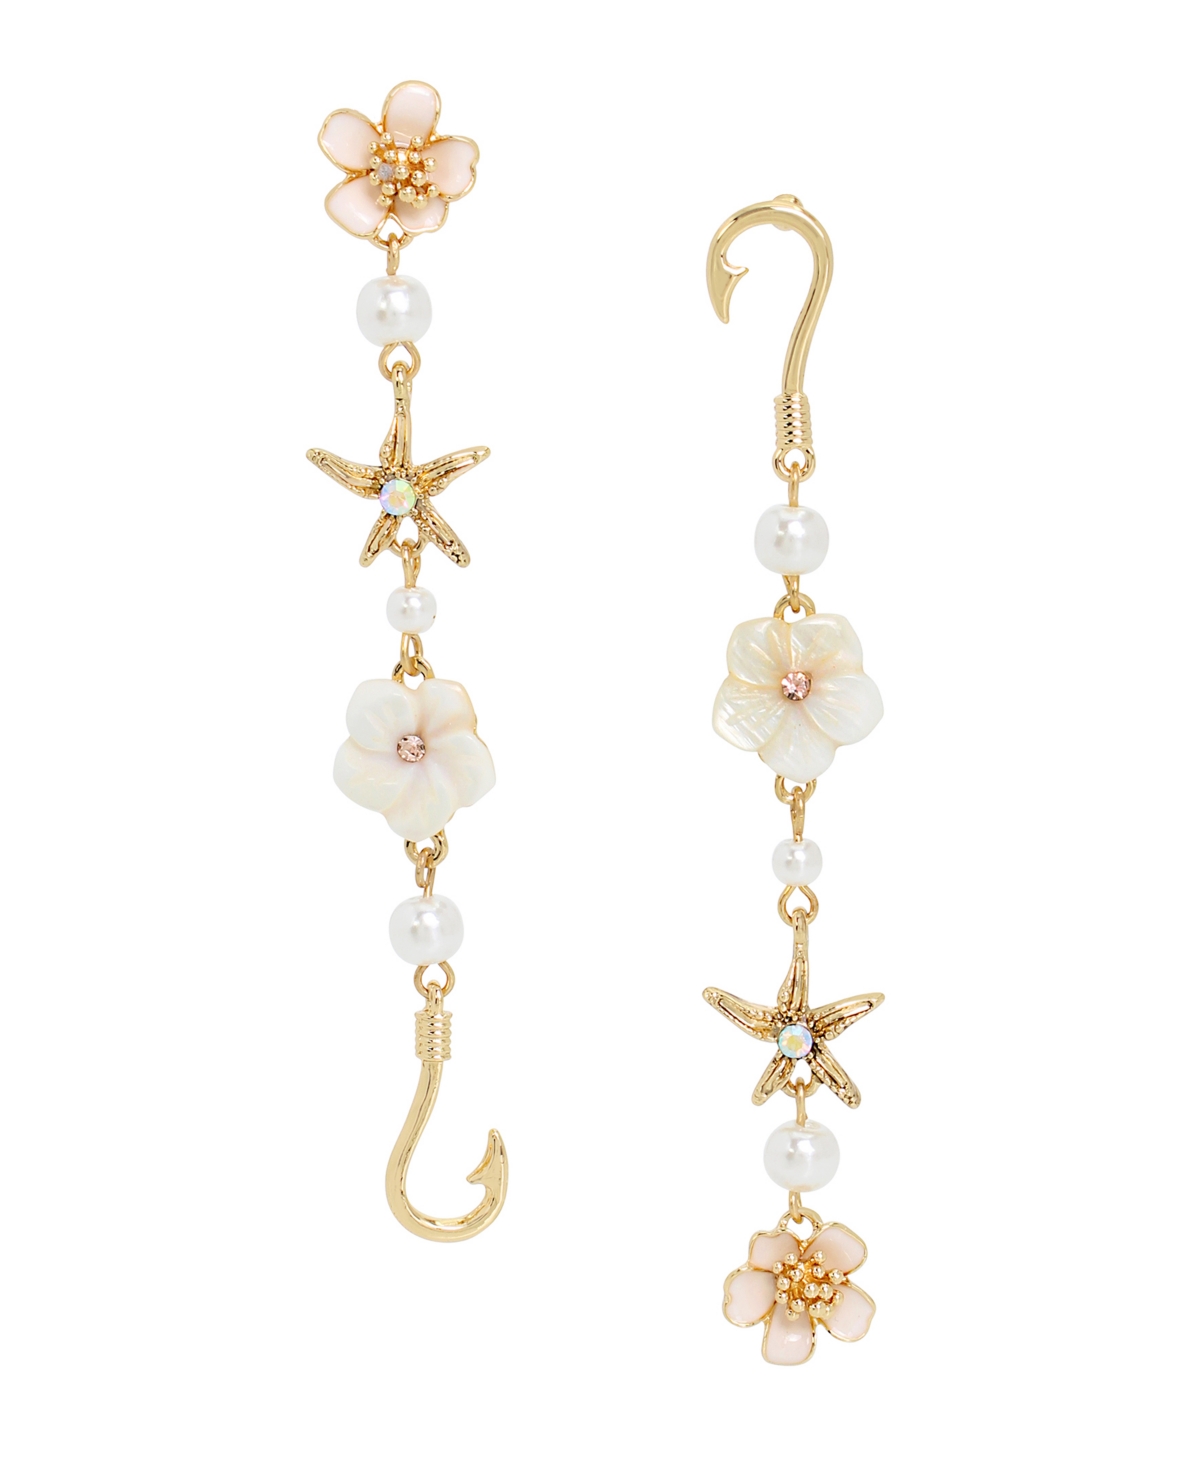 Faux Stone Starfish Flower Mismatch Earrings - White, Gold